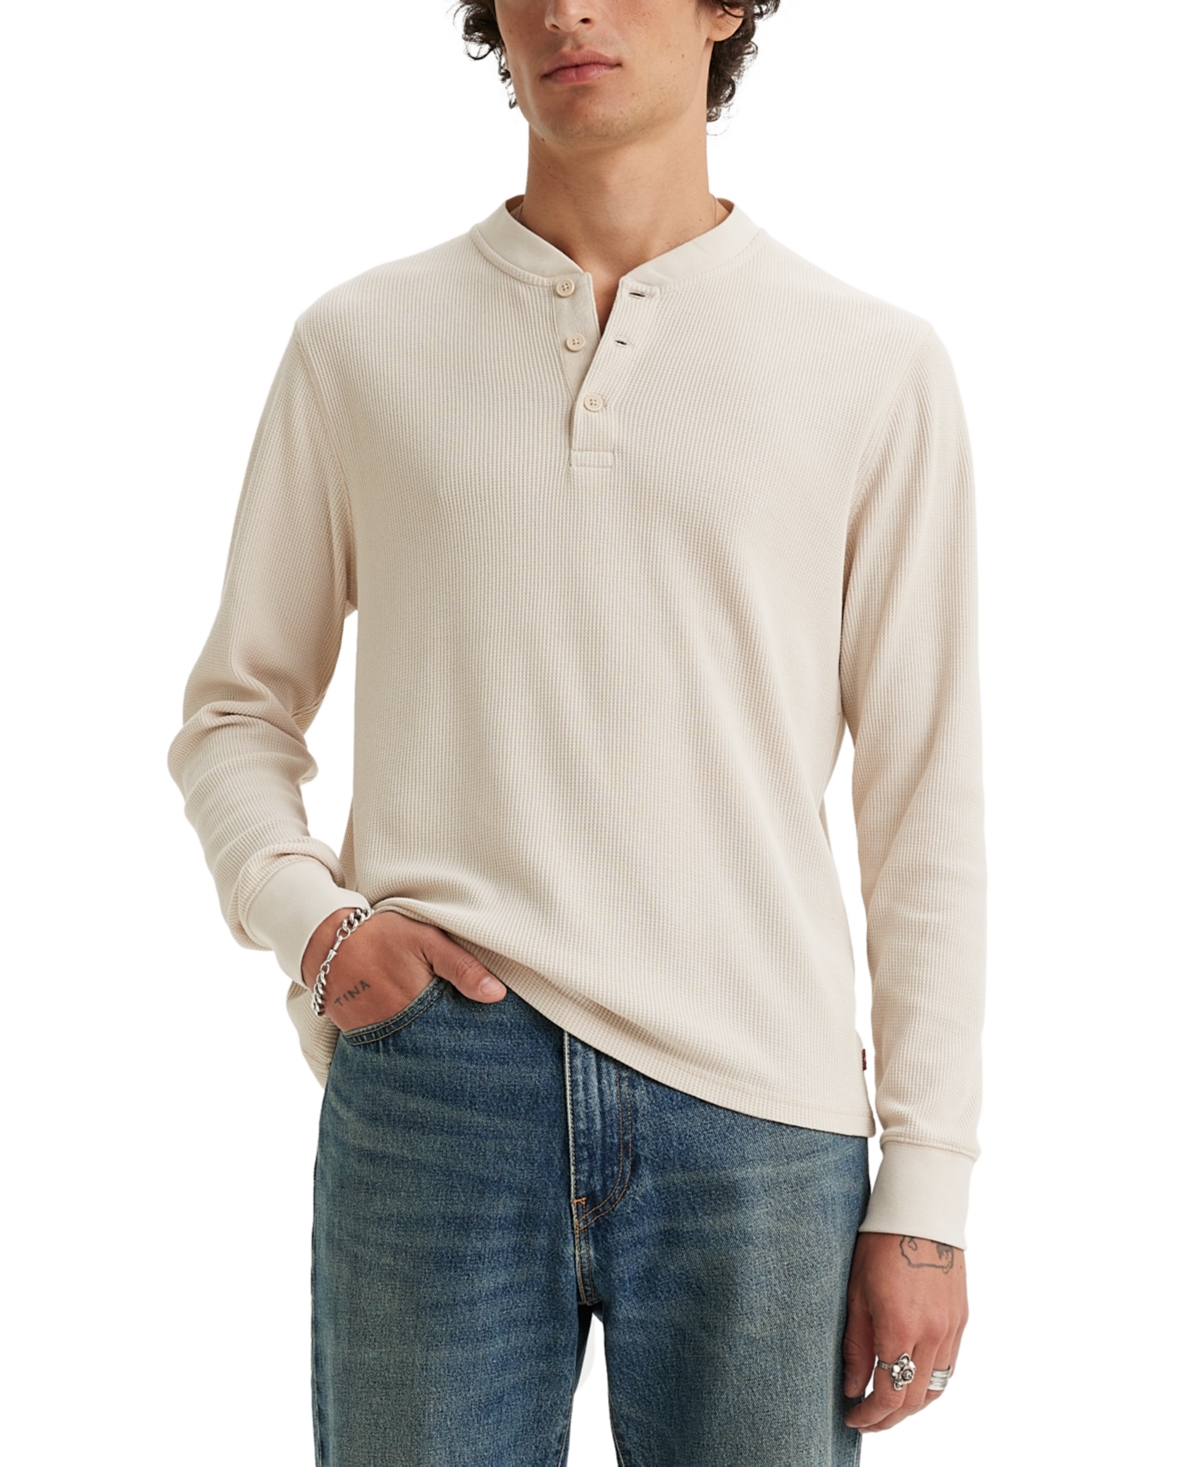 Levi's Levis Men's Long-sleeve Thermal Henley Shirt In Rainy Day